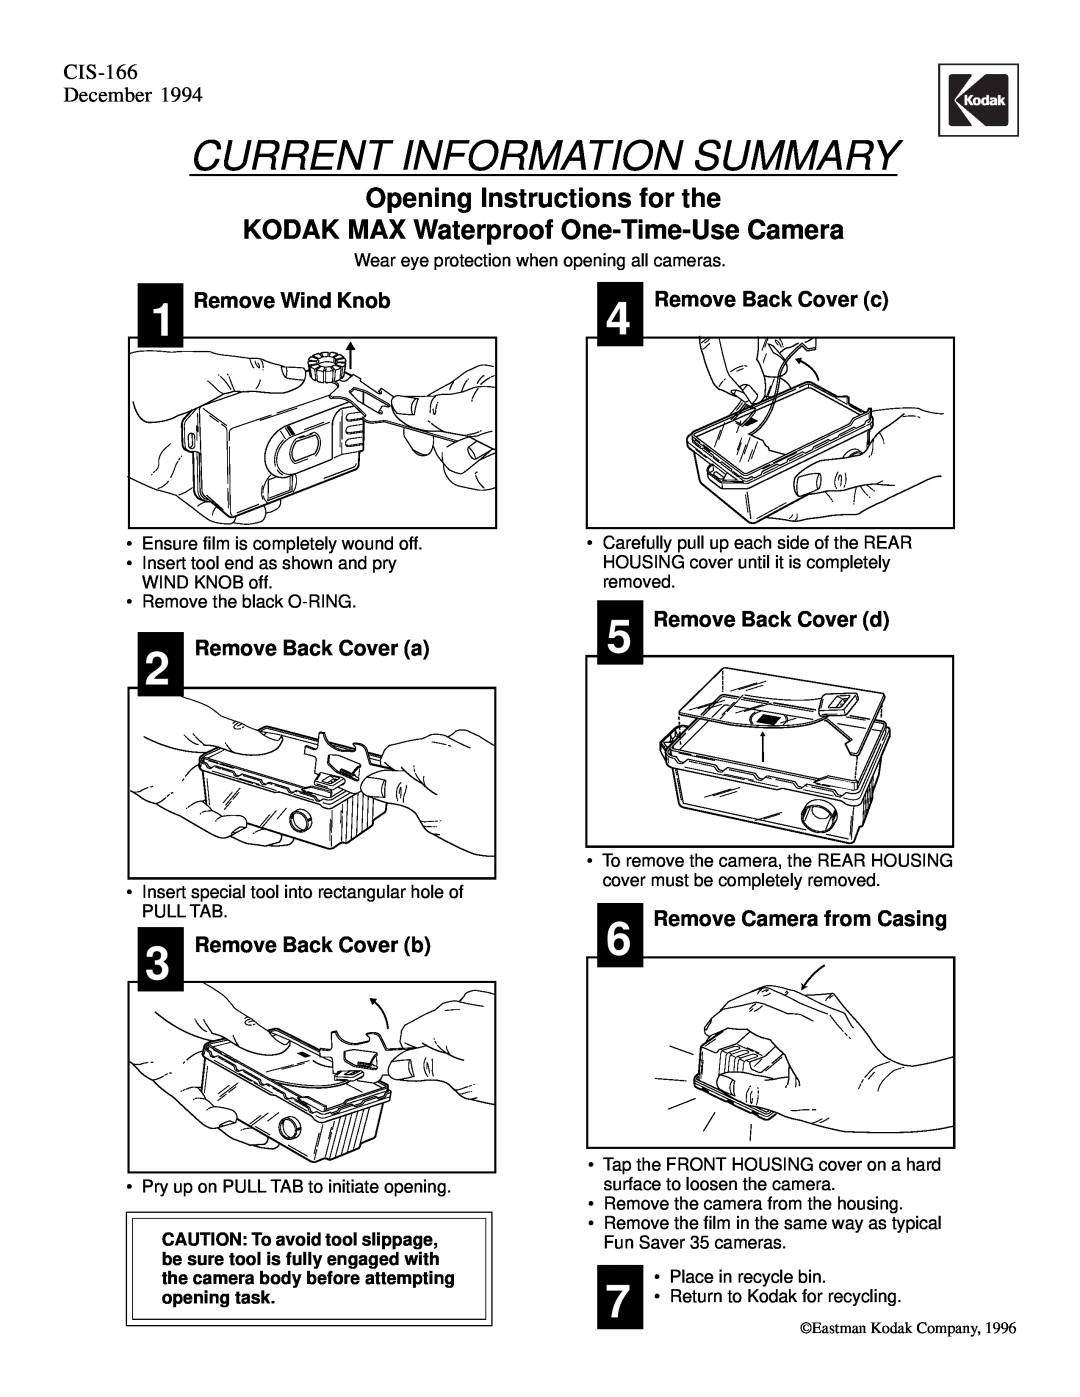 Kodak CIS-166 manual Current Information Summary, Opening Instructions for the KODAK MAX Waterproof One-Time-Use Camera 